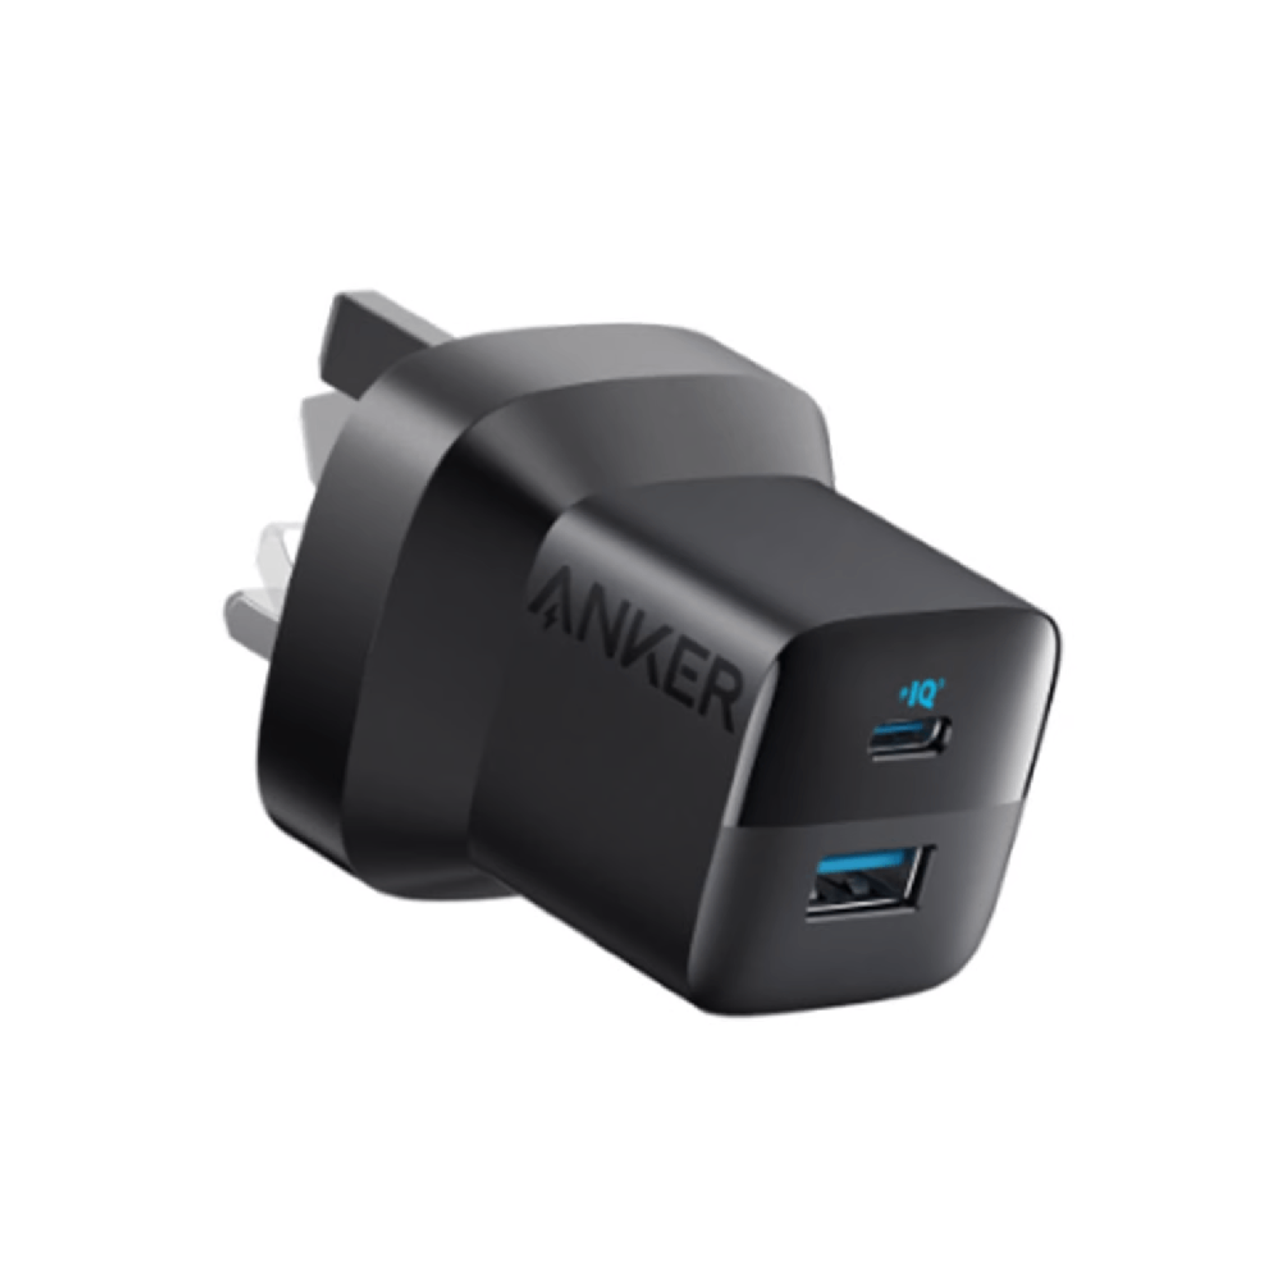 Anker 323 Wall Charger (33W) with USB-C Port and USB-A Port - Black